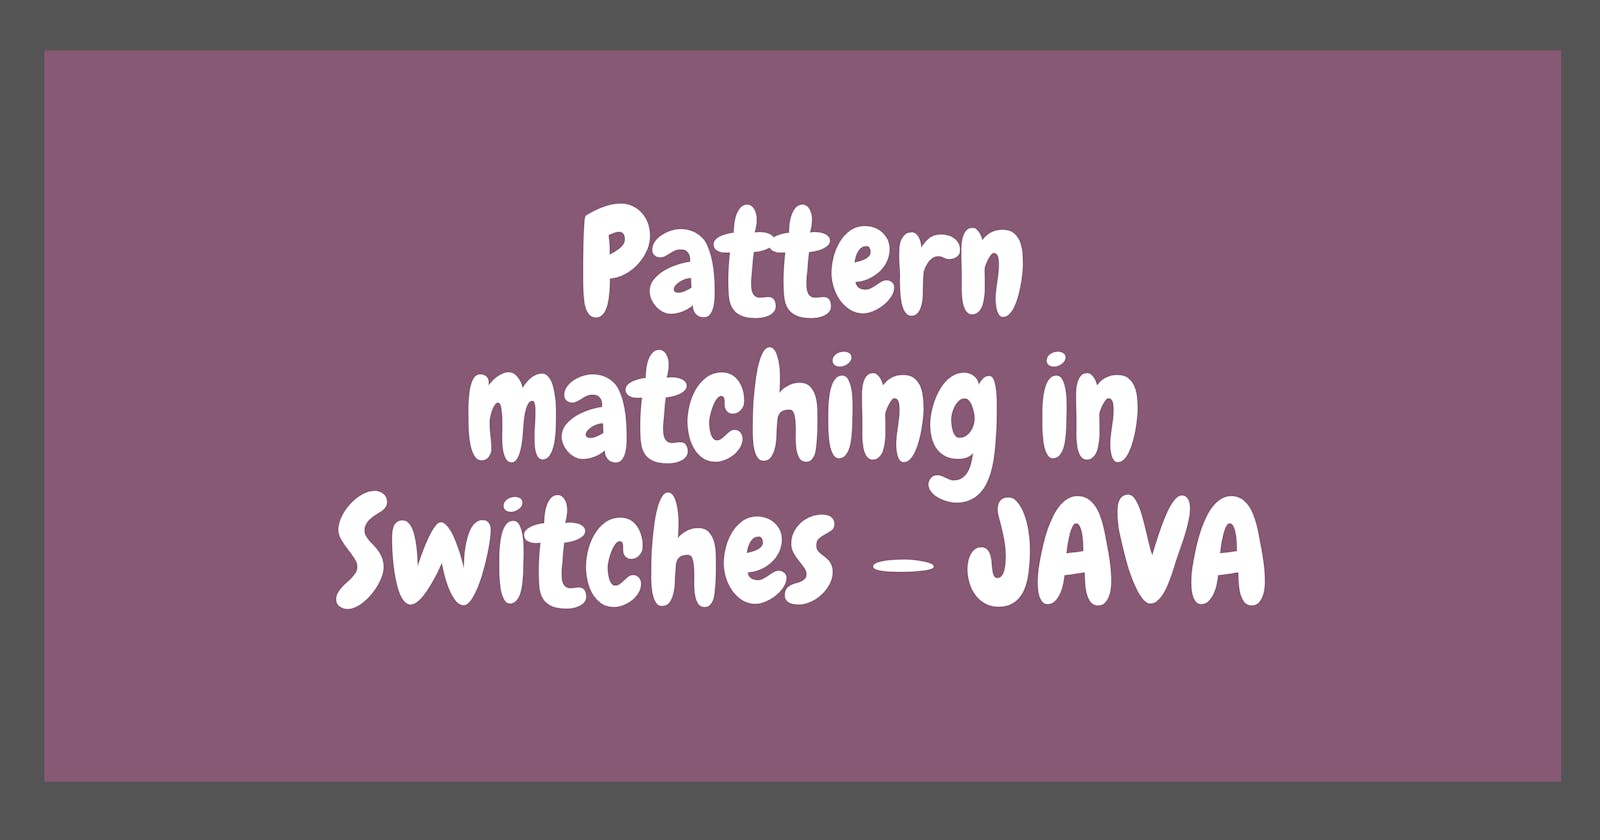 Pattern matching comes to Switches in Java